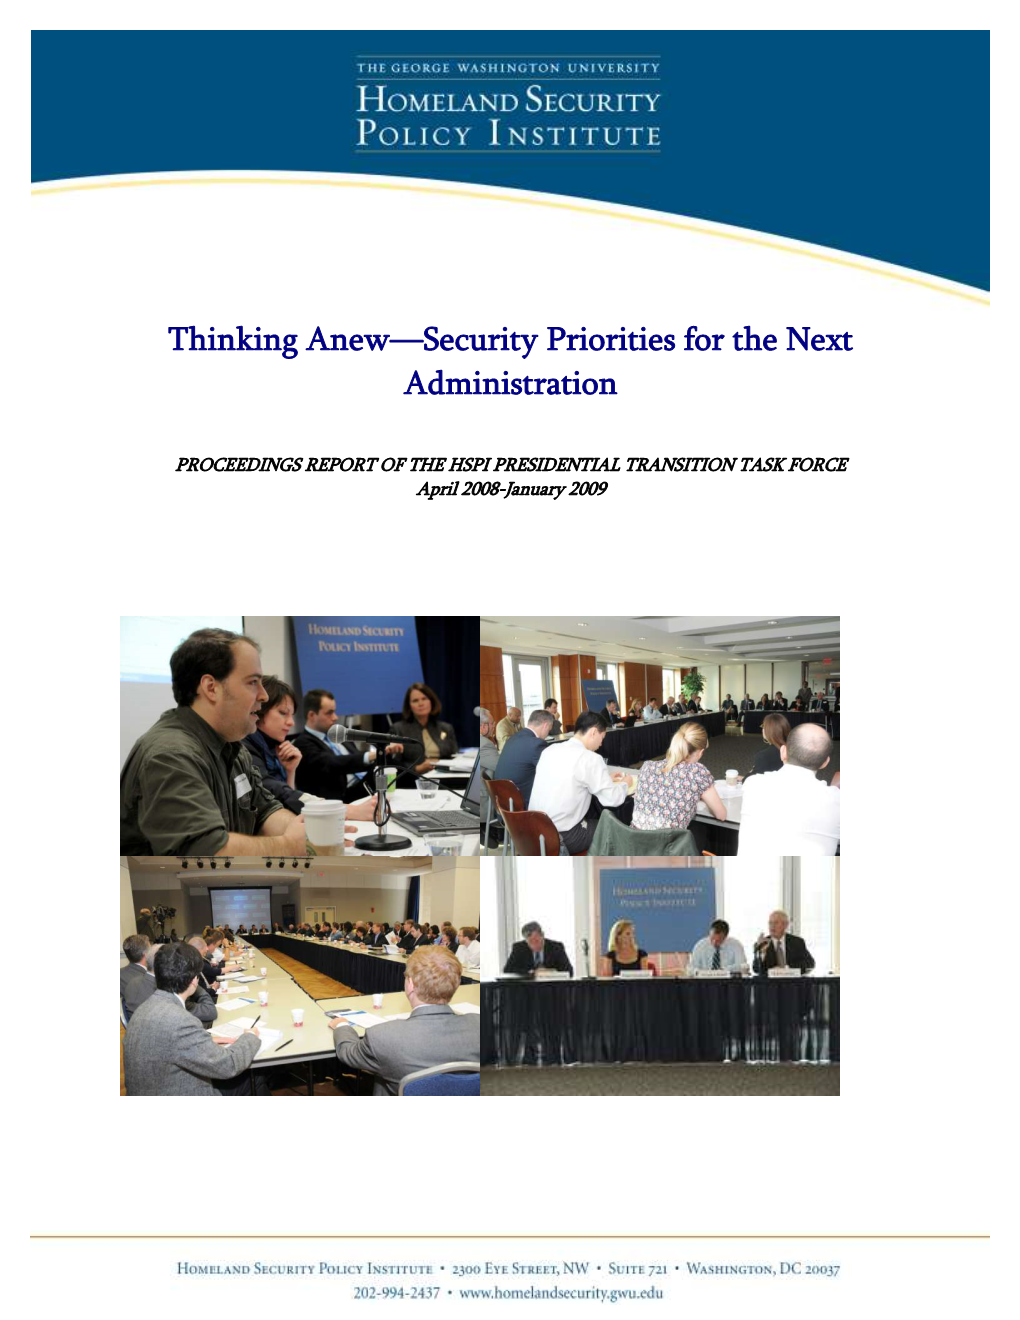 Thinking Anew—Security Priorities for the Next Administration